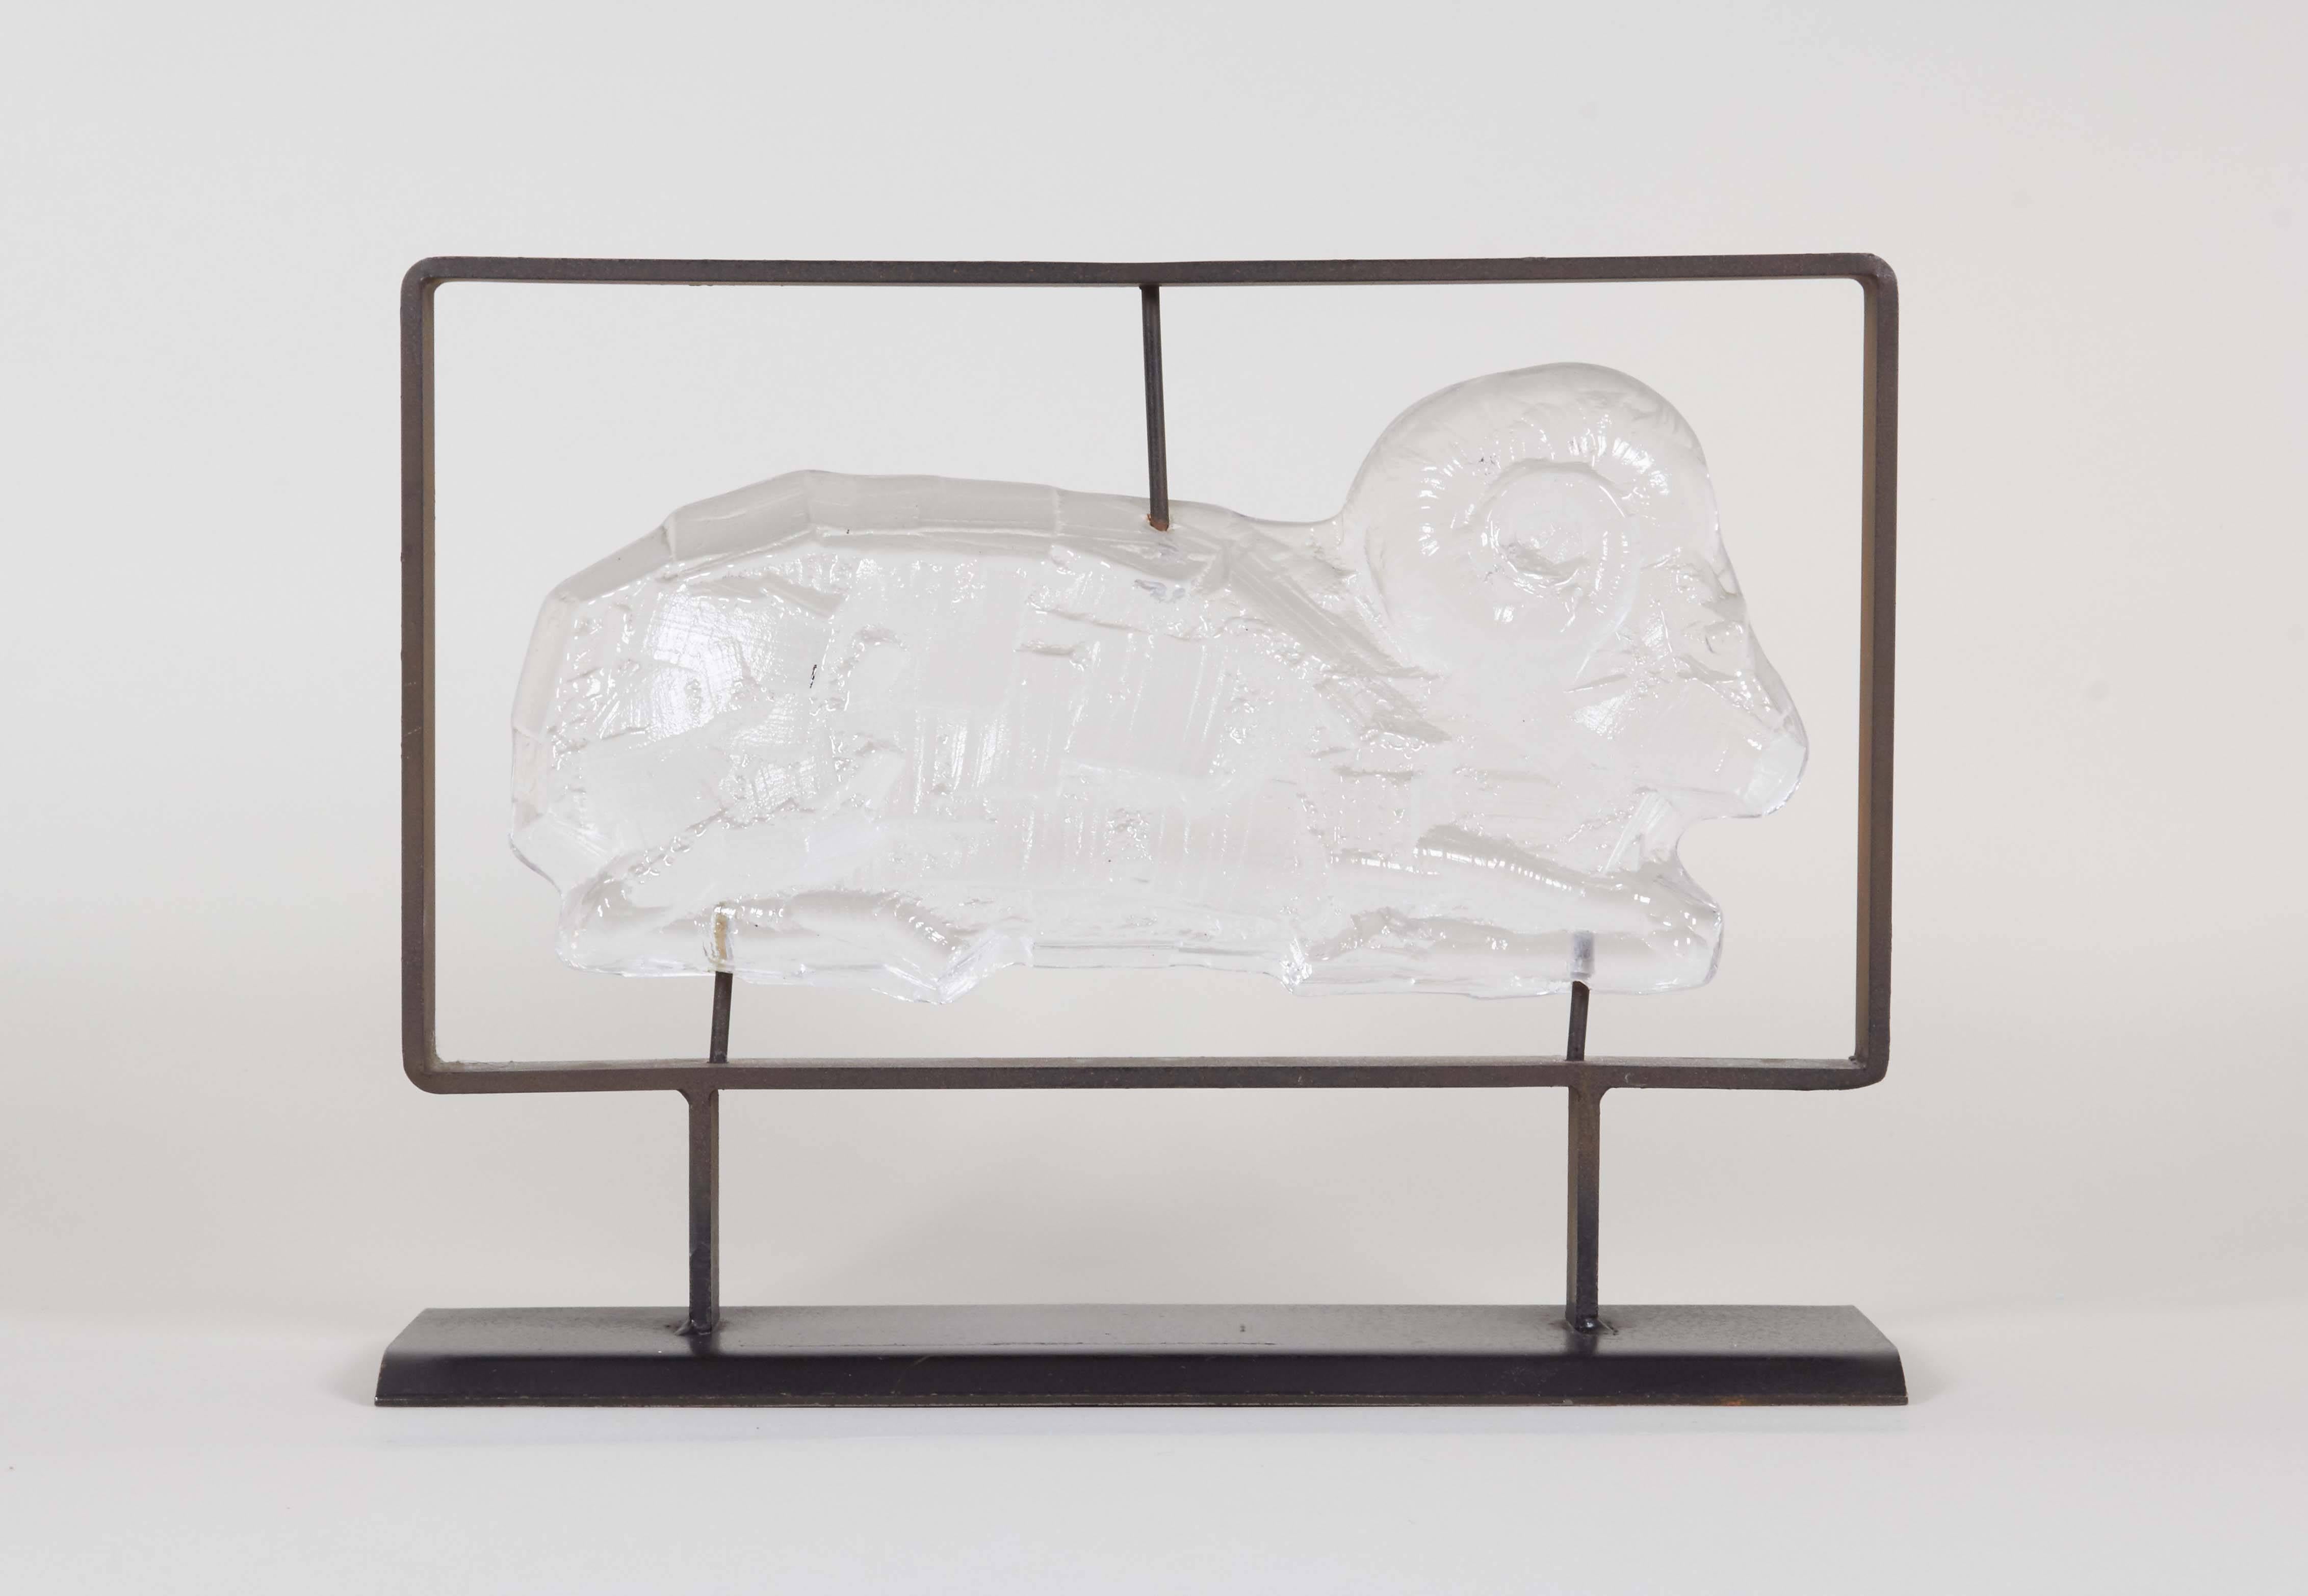 A sculptural ram by Erik Höglund for Kosta Boda, produced in Sweden, circa 1950s-1960s, crafted of clear, artfully detailed glass, mounted on a metal stand. Very good vintage condition, wear to base consistent with age and use.